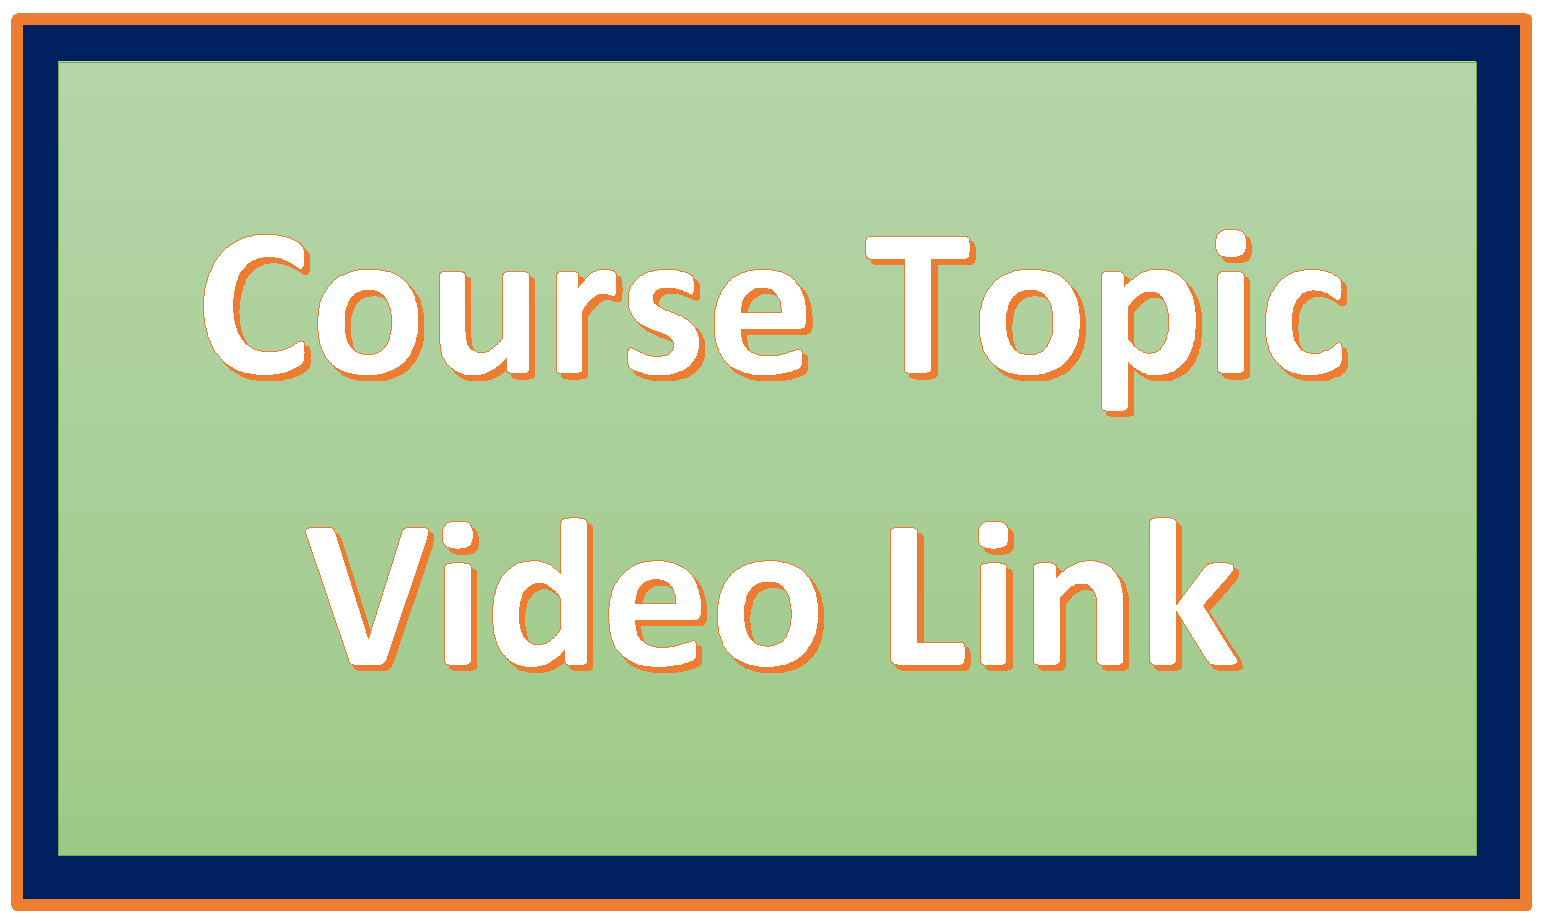 http://study.aisectonline.com/images/CCE Course Topic Videos Link.png